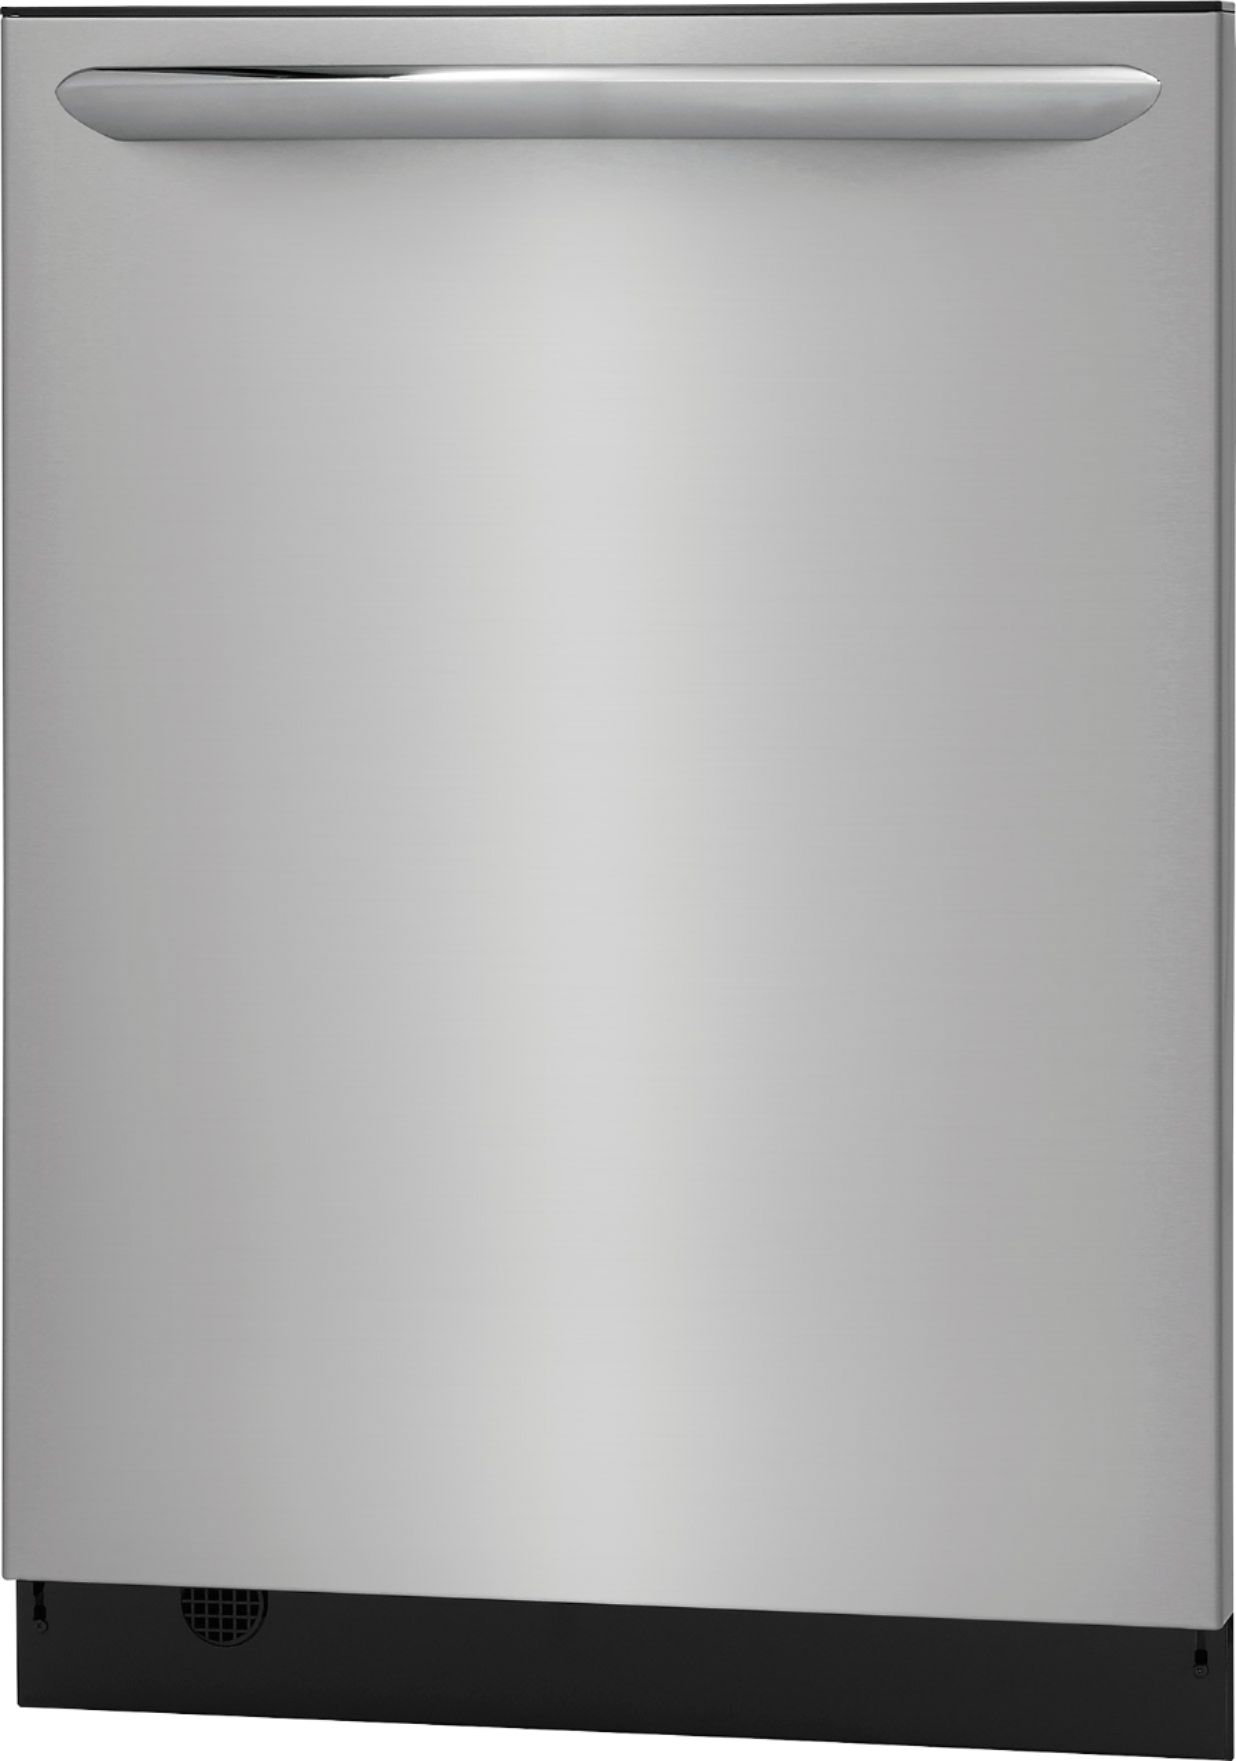 Left View: Frigidaire - Gallery 24" Top Control Tall Tub Built-In Dishwasher with Stainless Steel Tub - Stainless steel